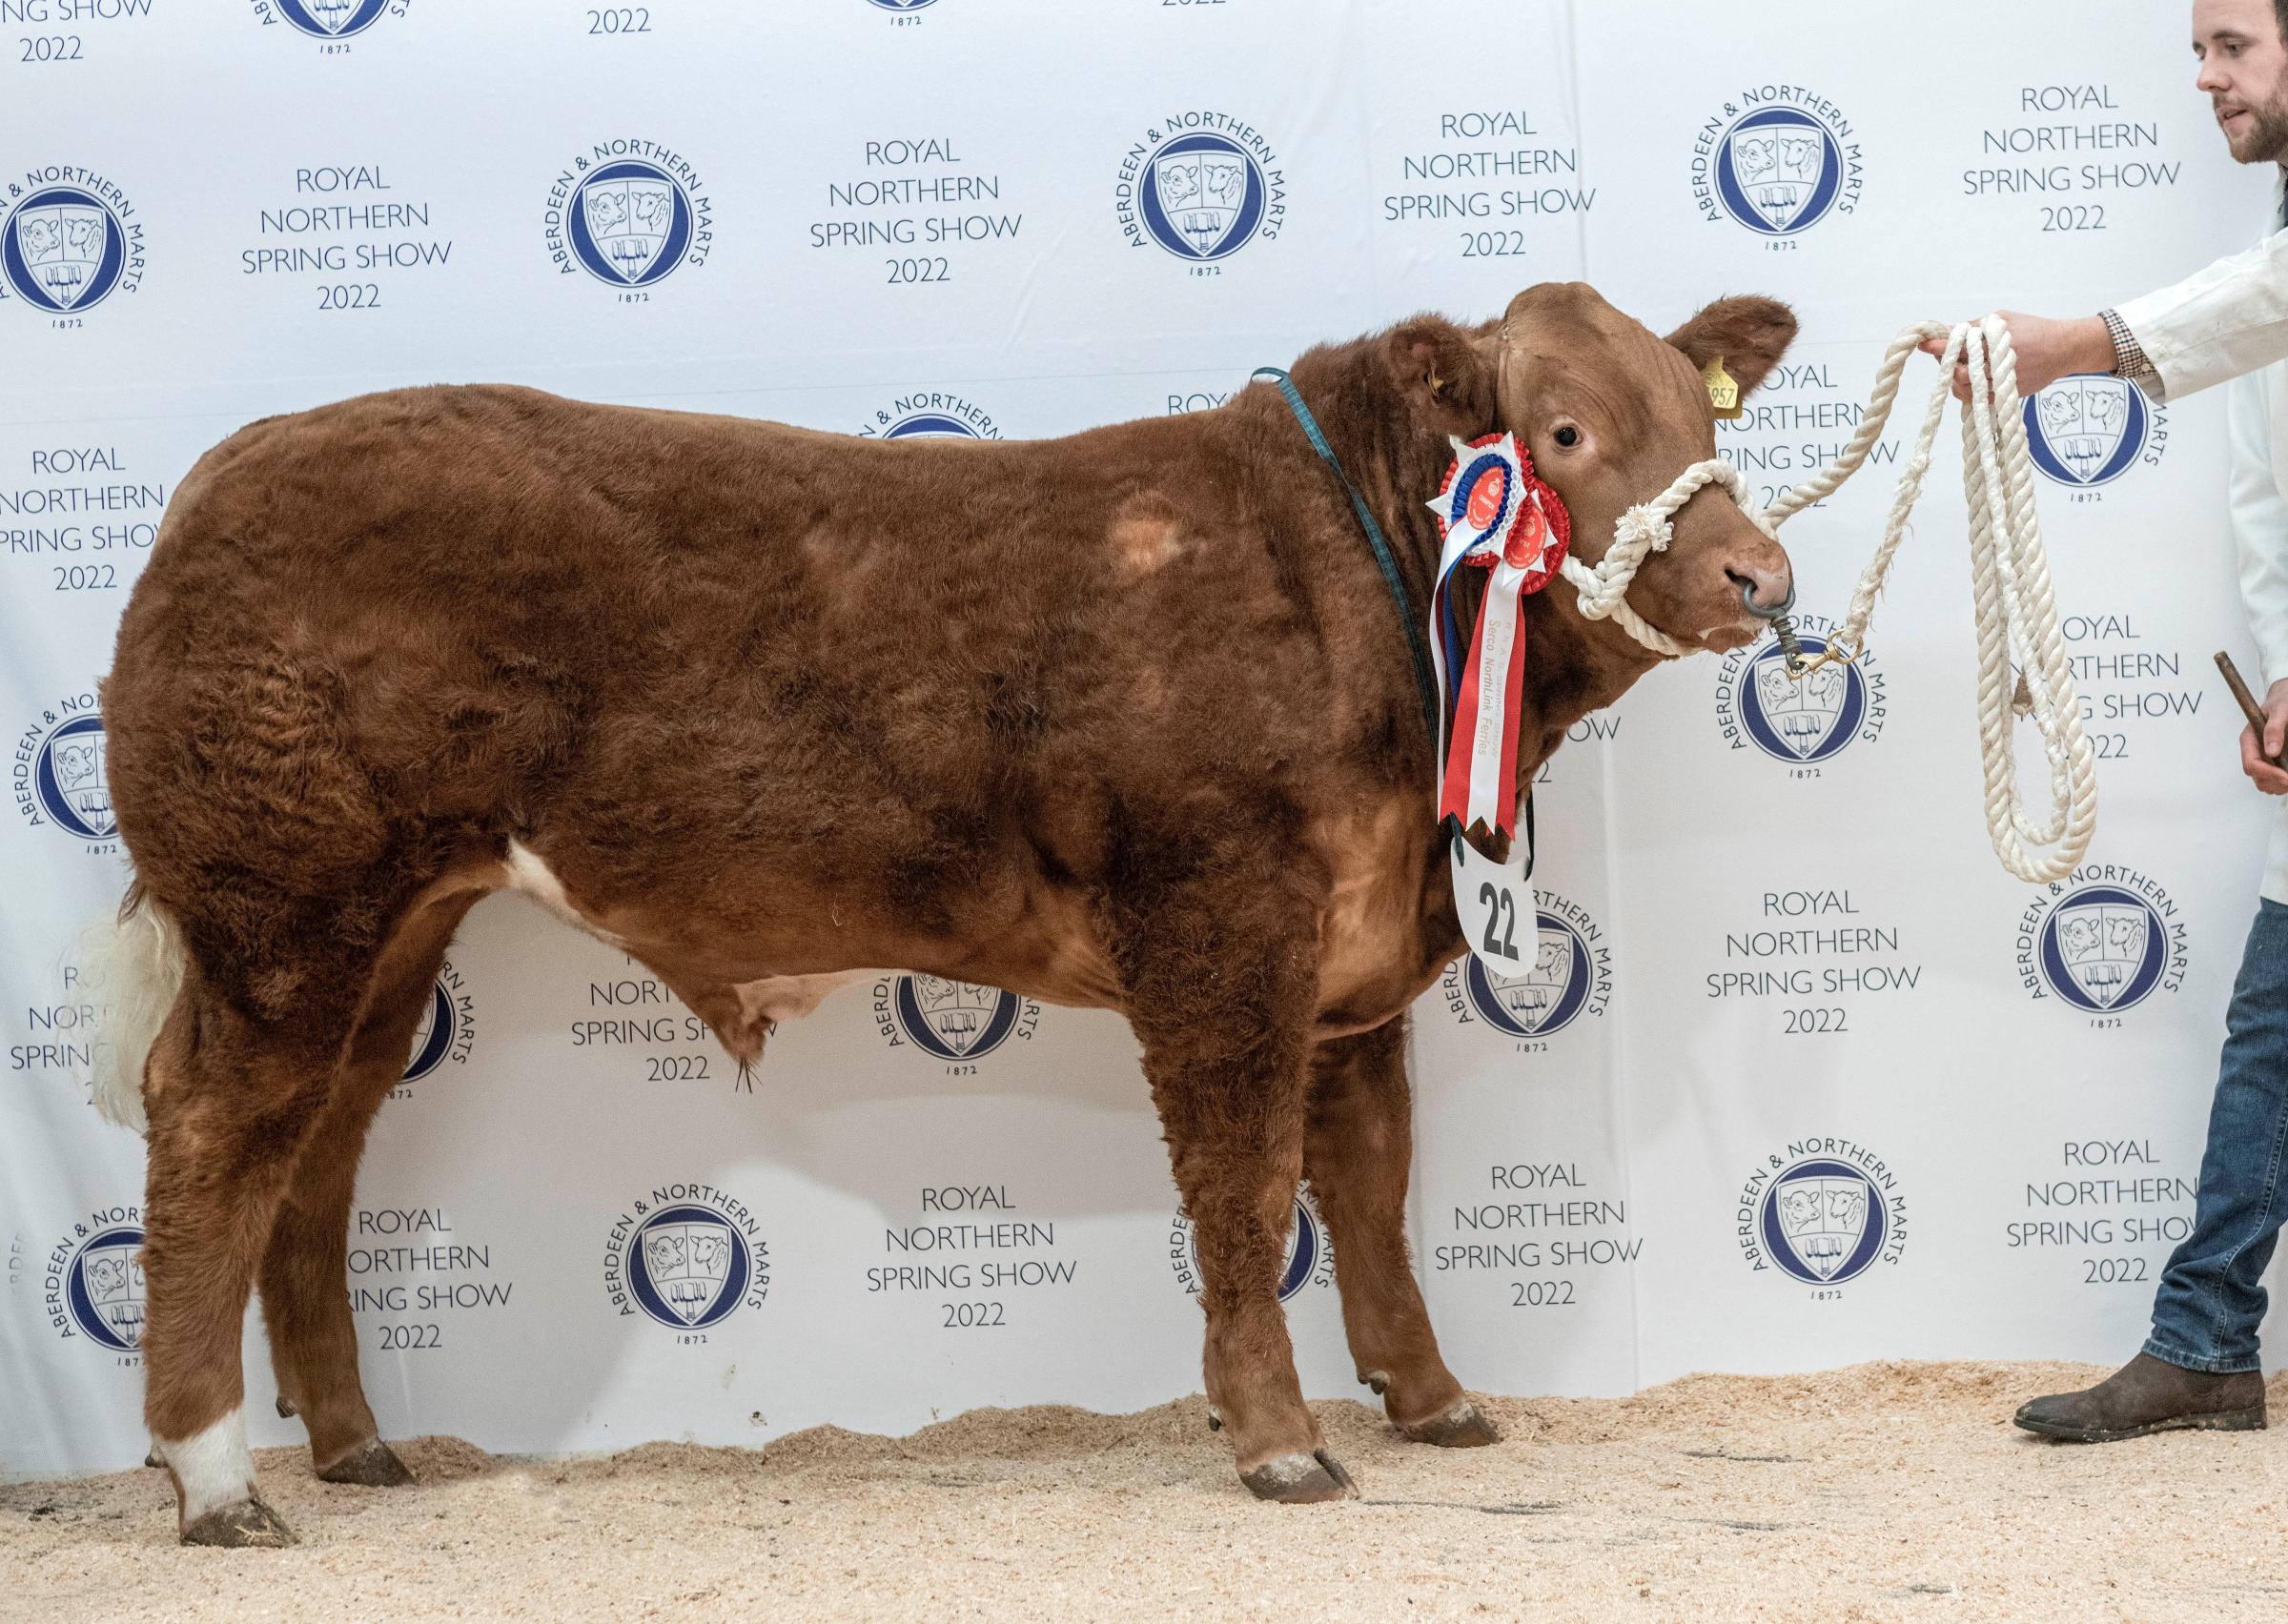 Exhibition bullock champion from William Robertson and Son, Fodderletter Farms, Tomintoul. sold for £1300